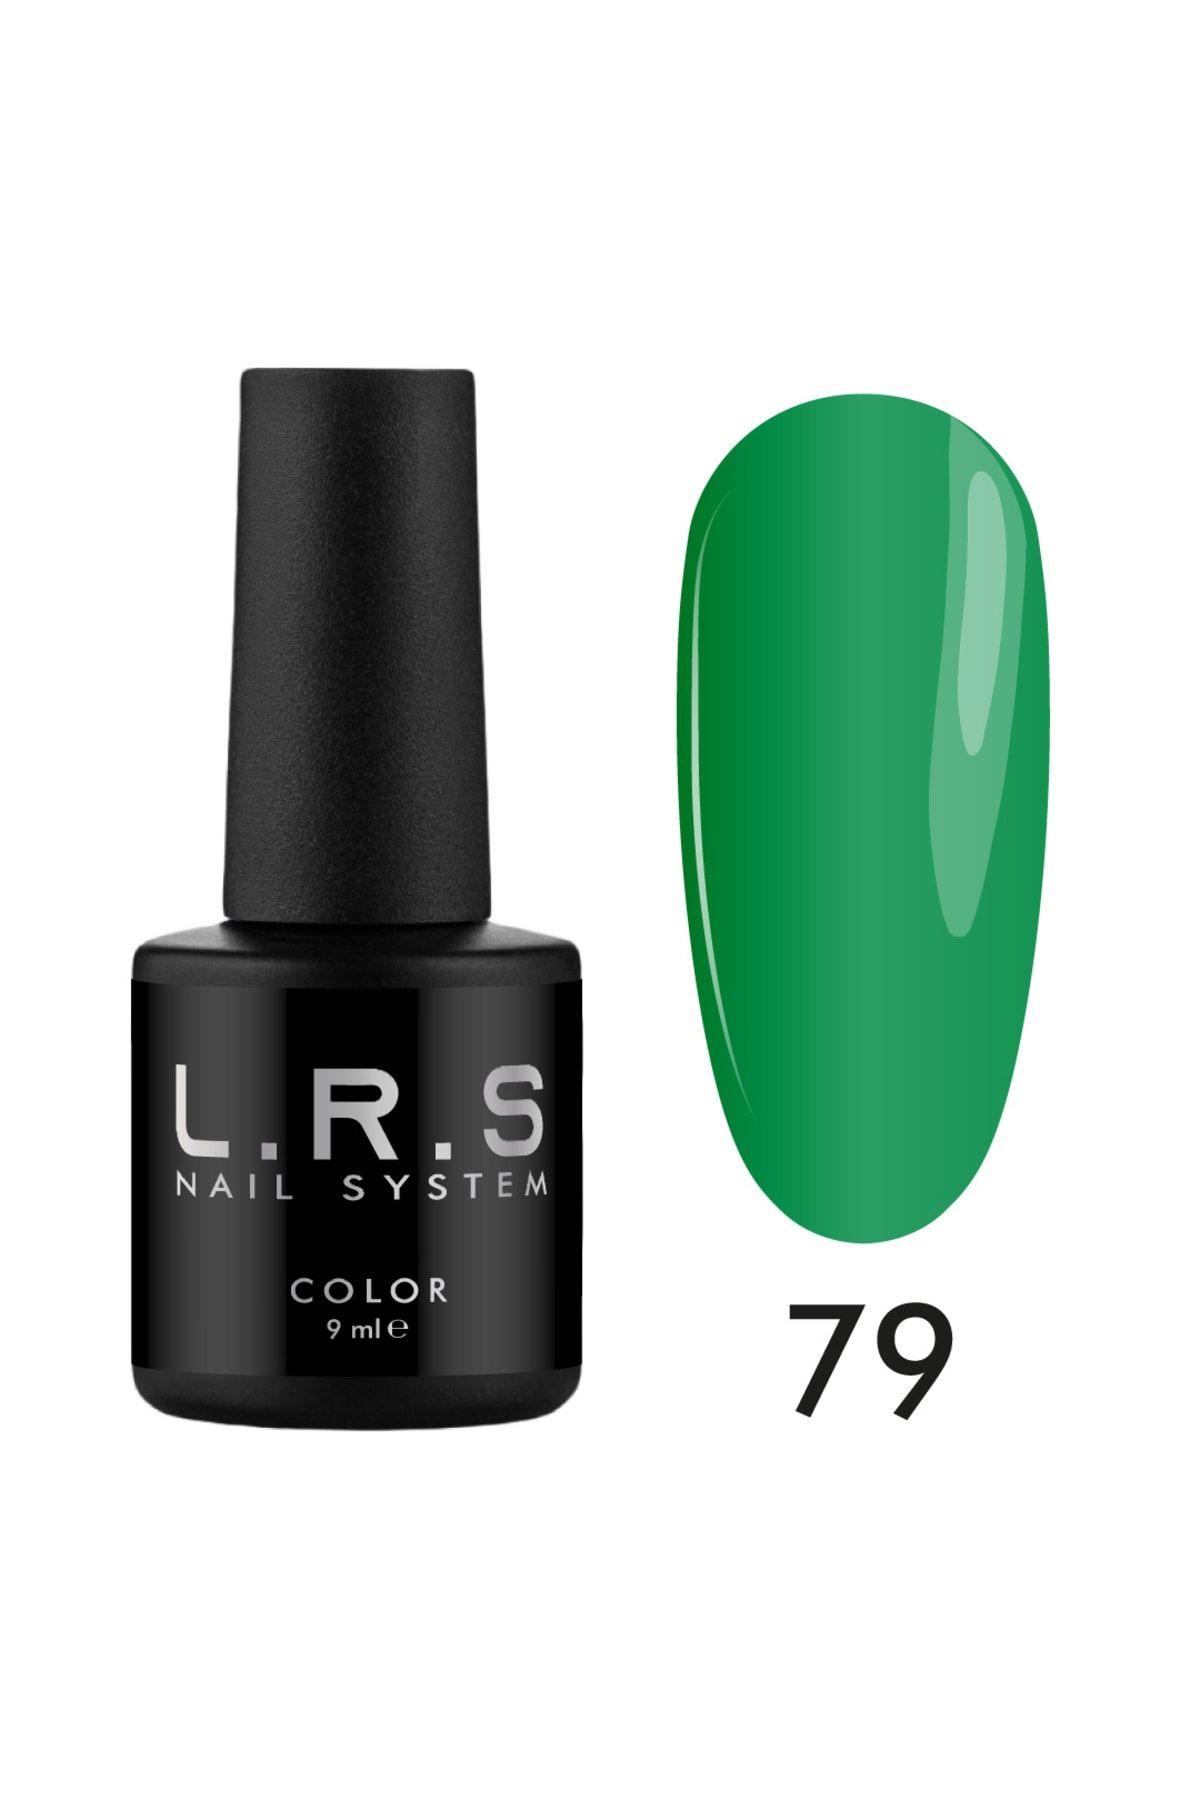 PNB Lrs Nail System 9ml Color 79